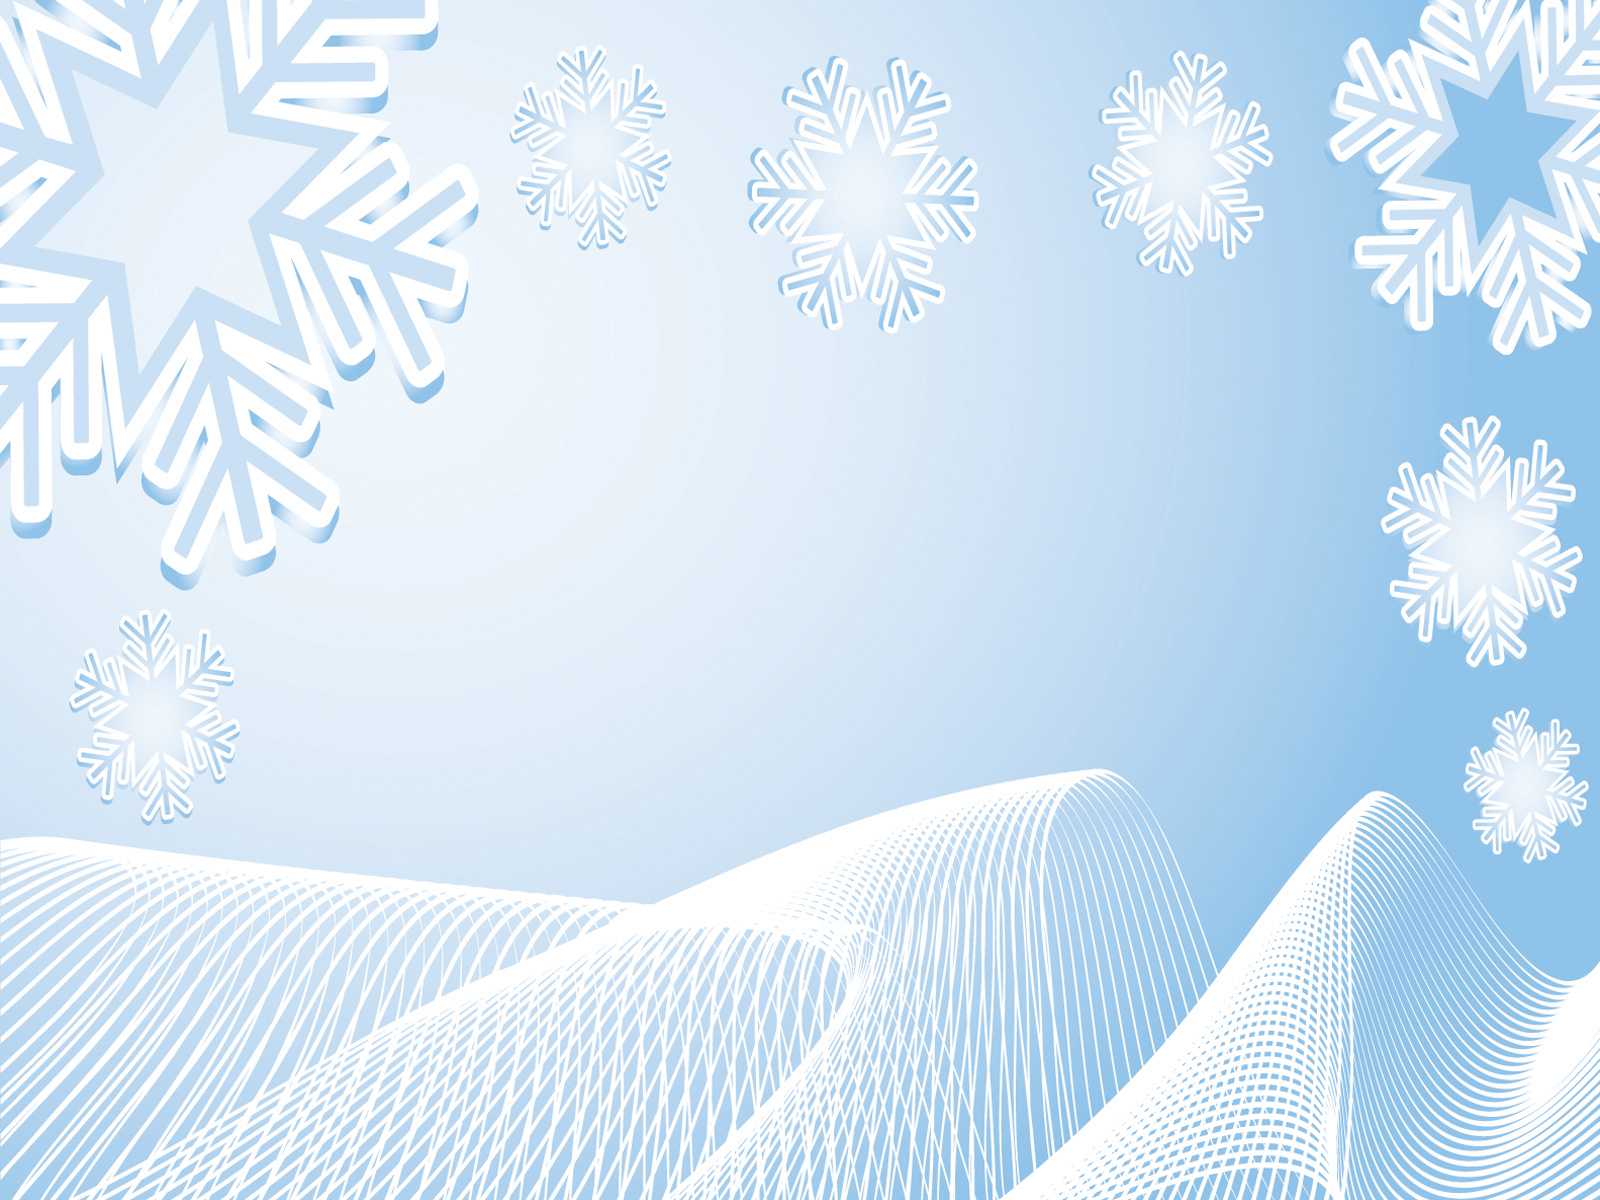 Snow Powerpoint – Free Ppt Backgrounds And Templates In Snow Powerpoint Template